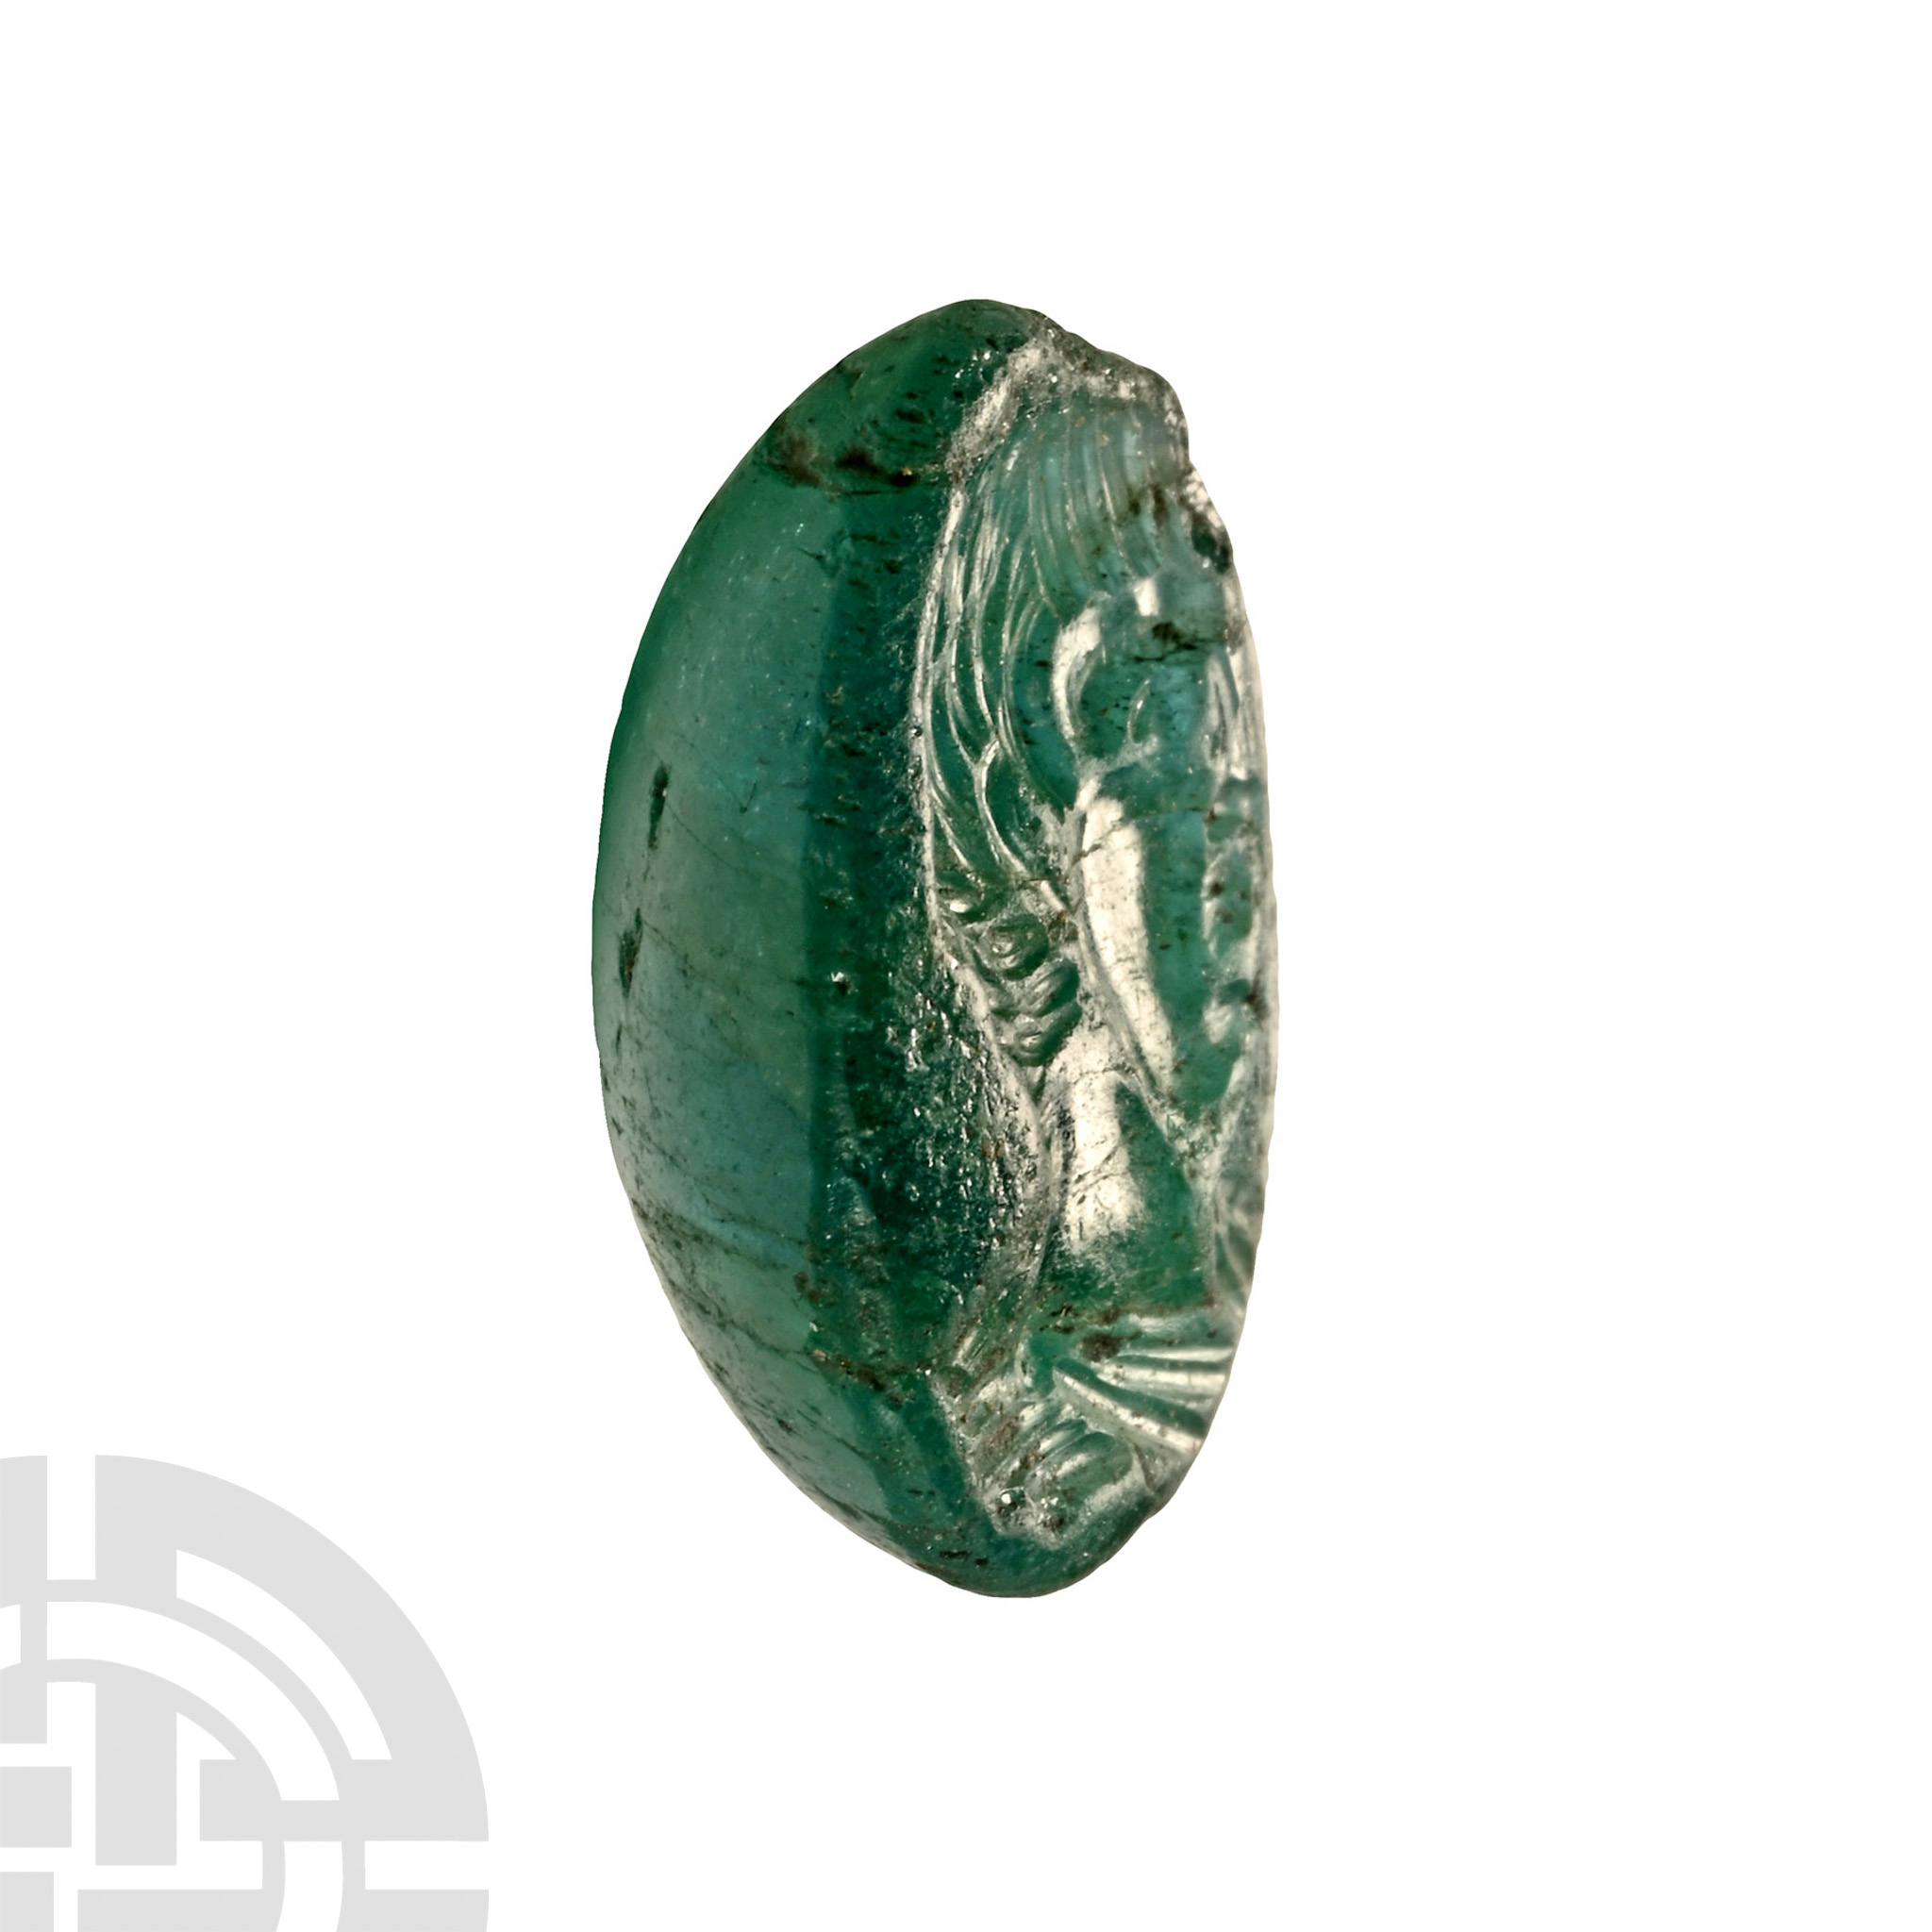 Roman Emerald Gemstone with Portrait of Young Nero - Image 2 of 2